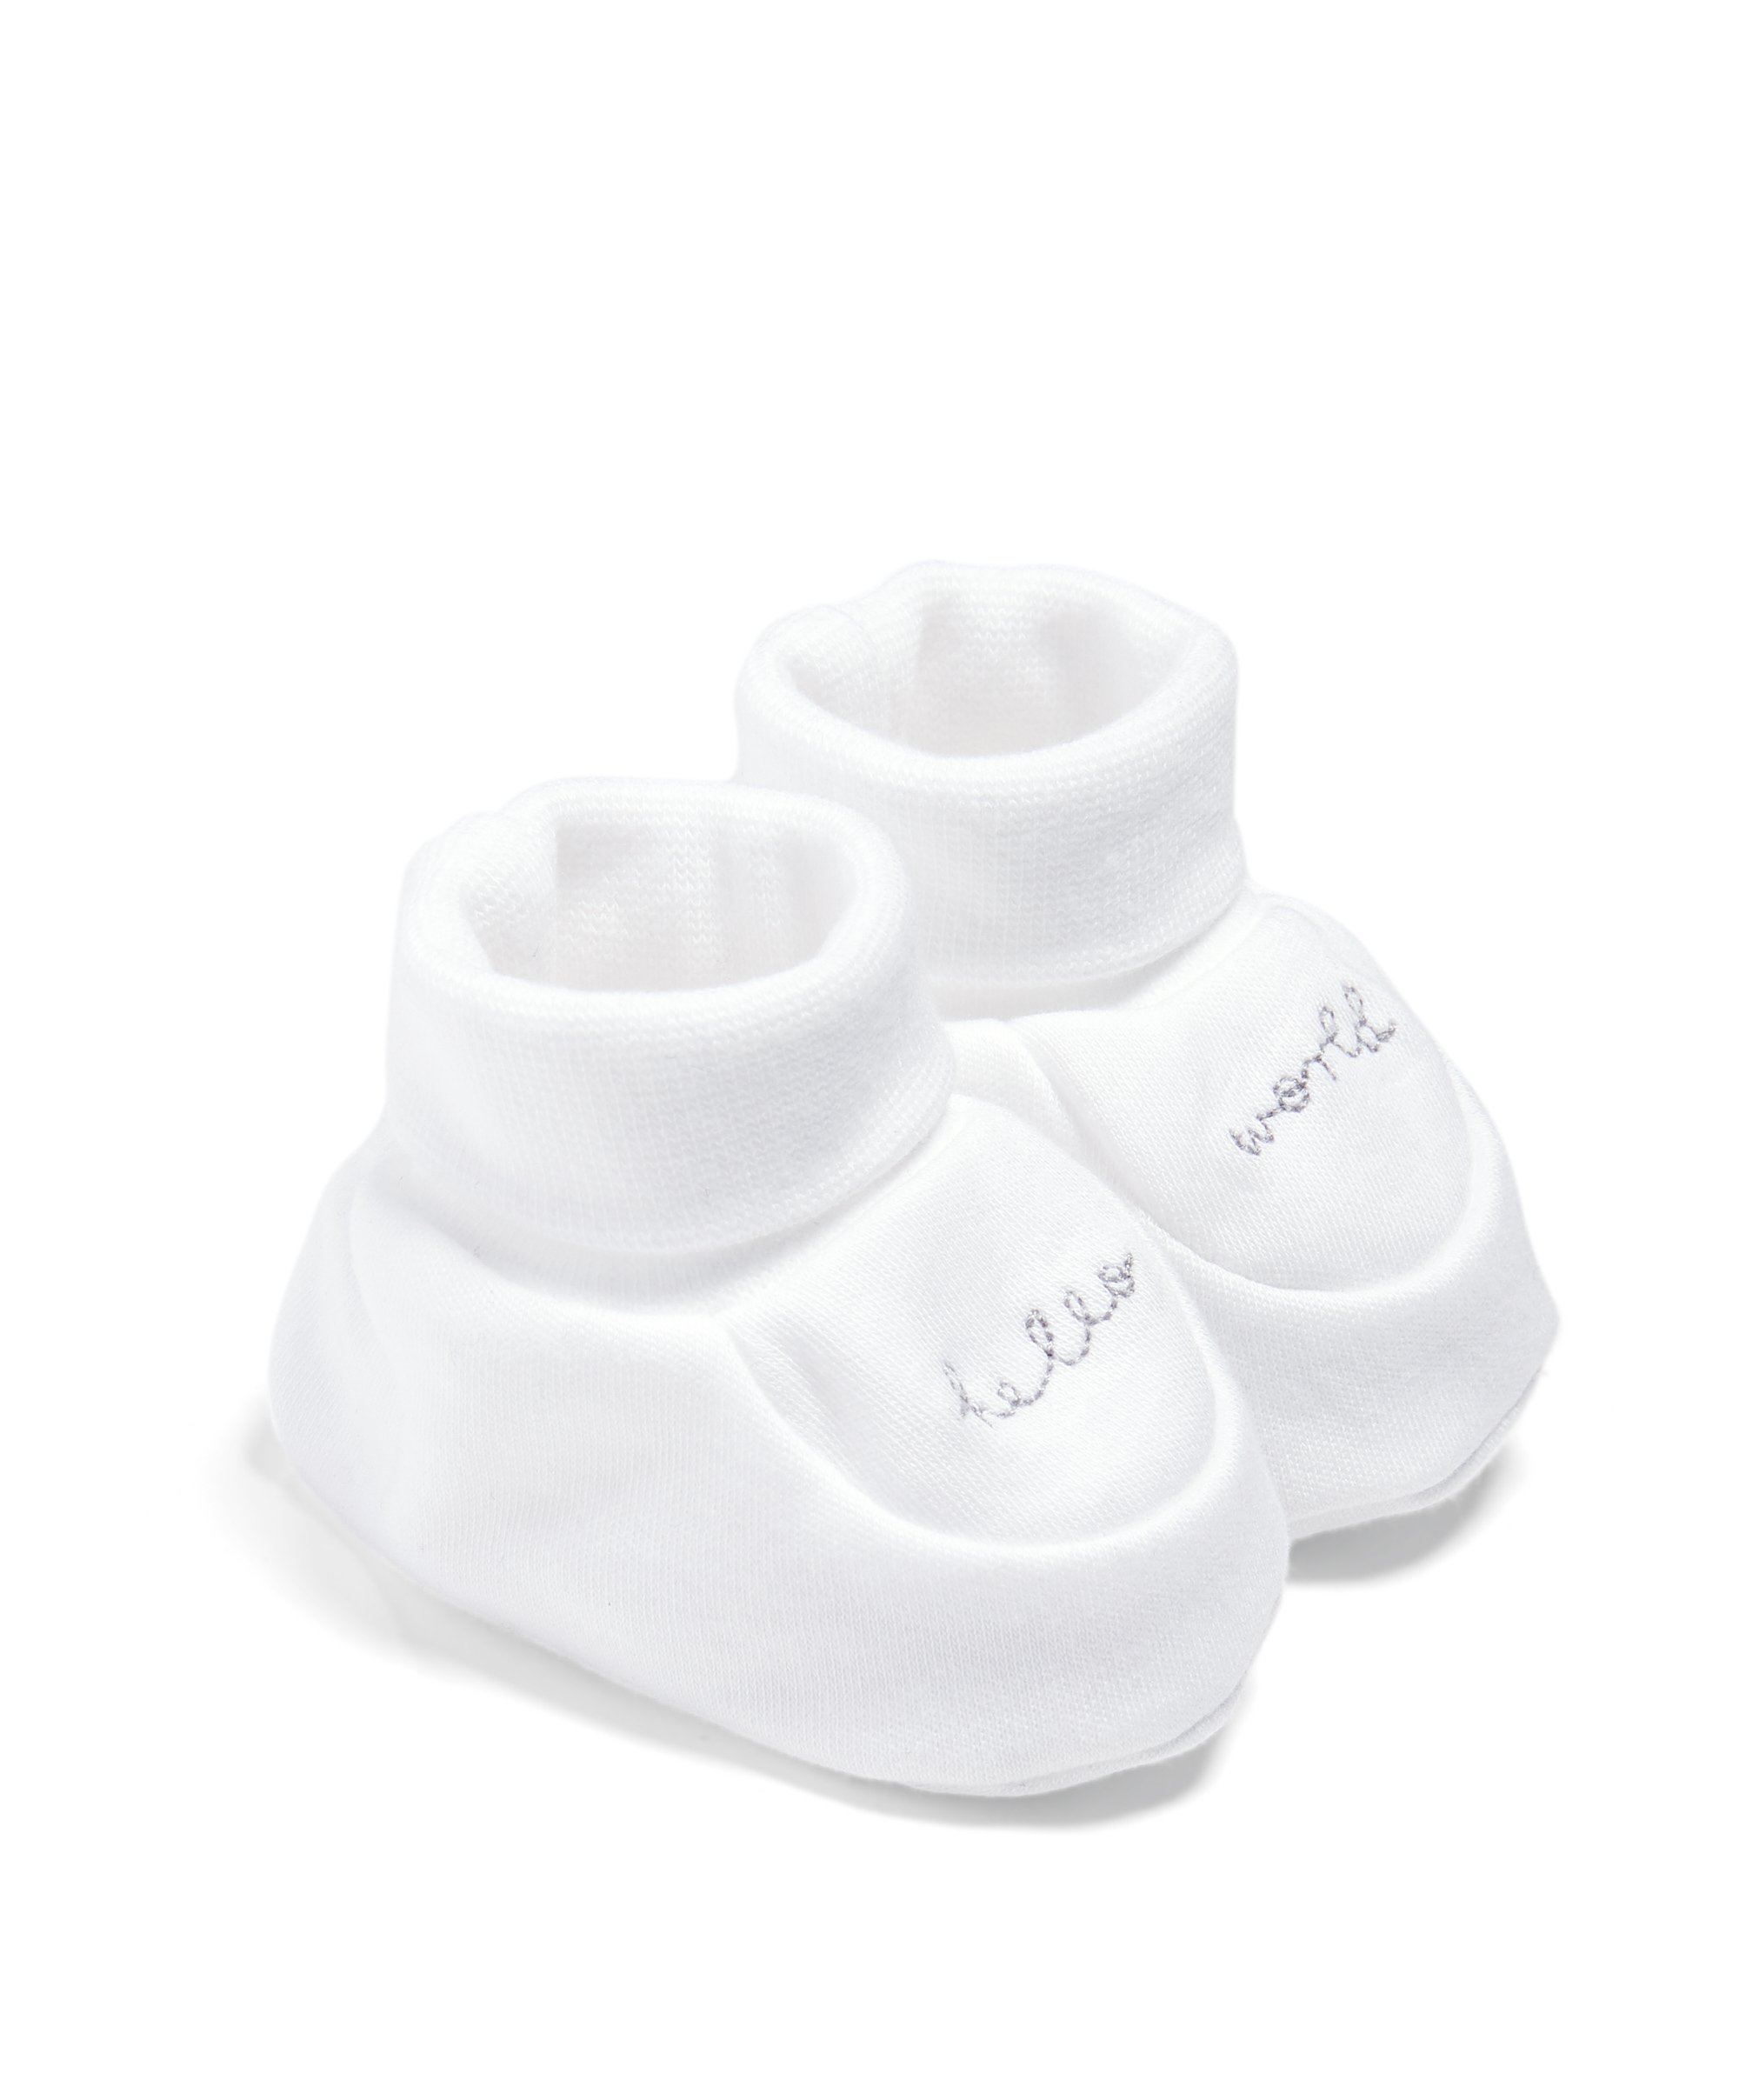 Buy Hello World Booties for AED 29.00 | Mamas & Papas AE